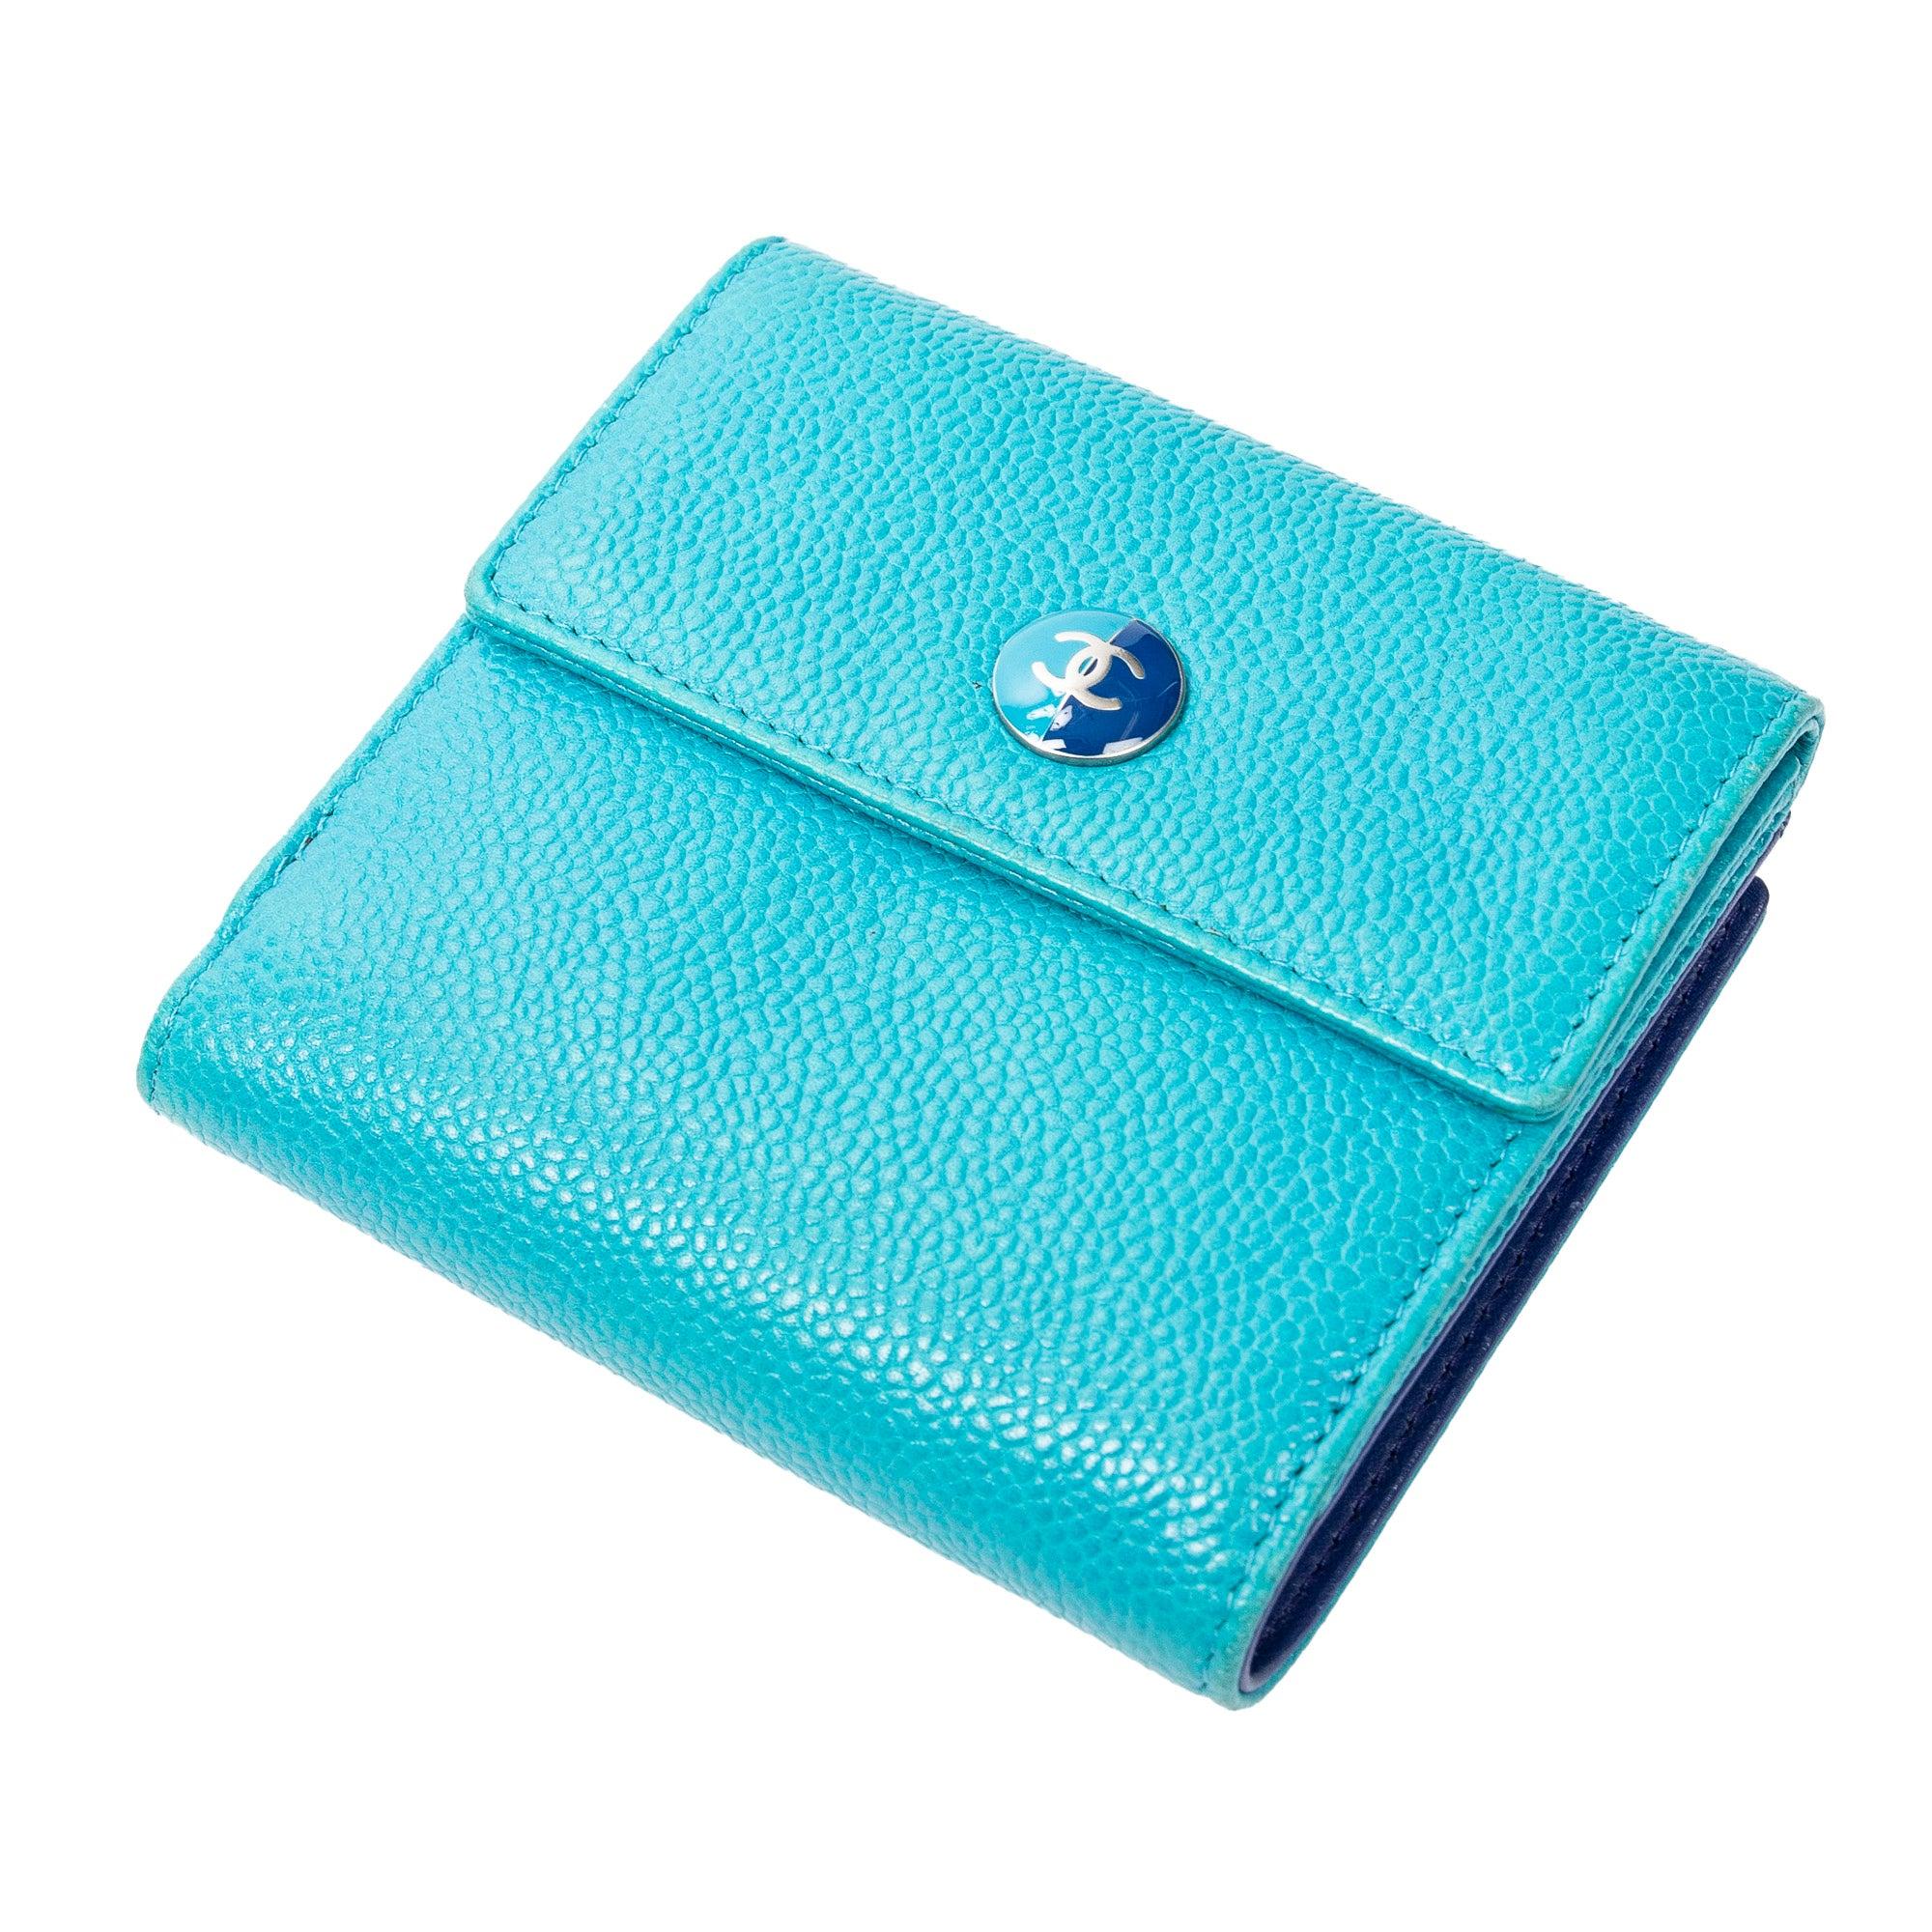 Chanel Cc Timeless Button Compact Bifold Wallet in Blue